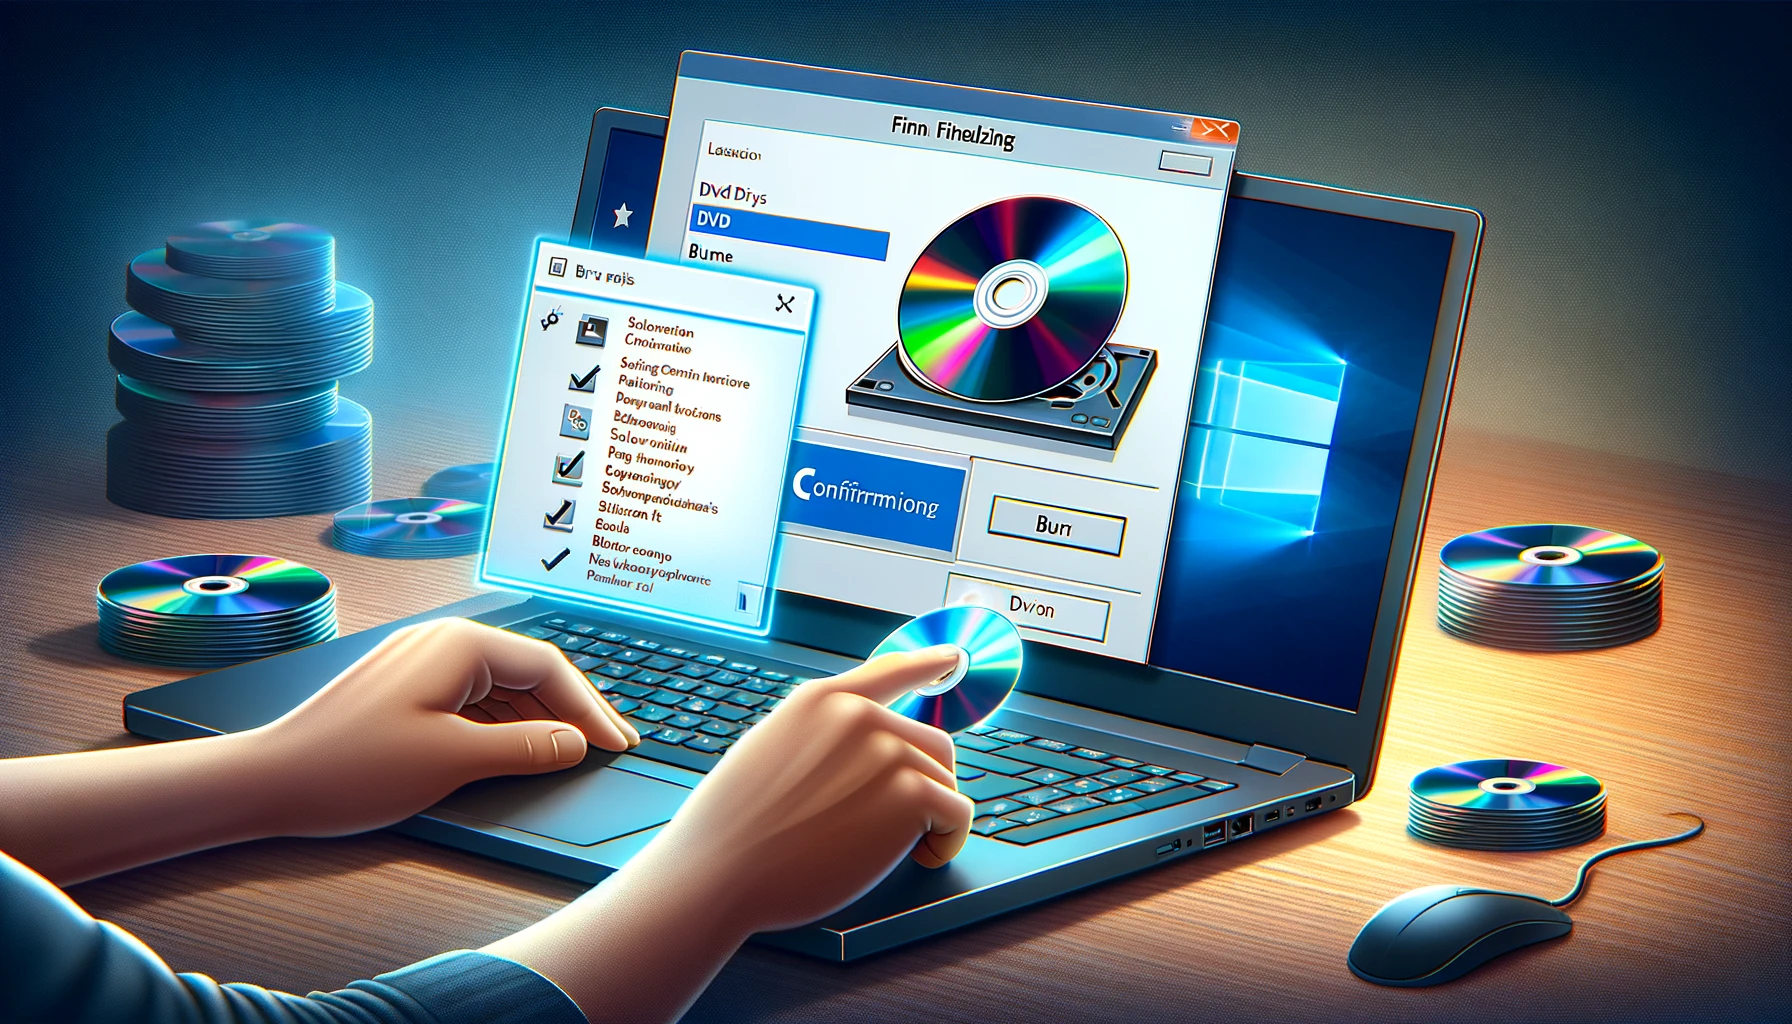 The image illustrating the process of finalizing a DVD on a Windows 10 laptop has been created